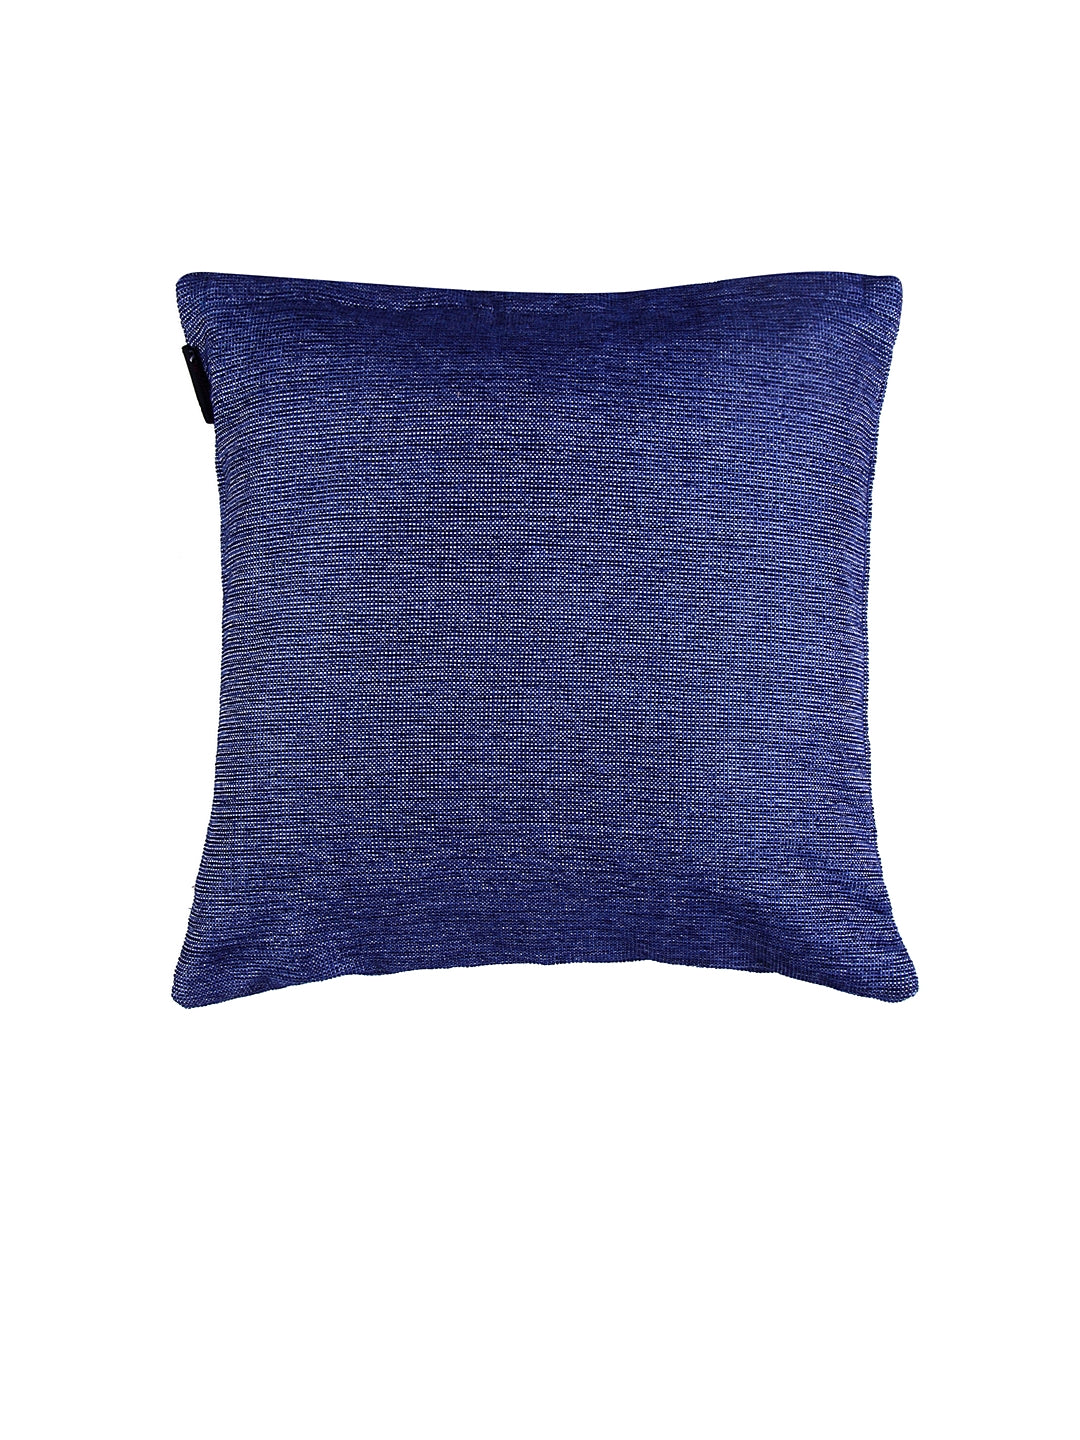 KLOTTHE Set of 5 Blue Polycotton Solid Cushion Covers (40X40 cm)